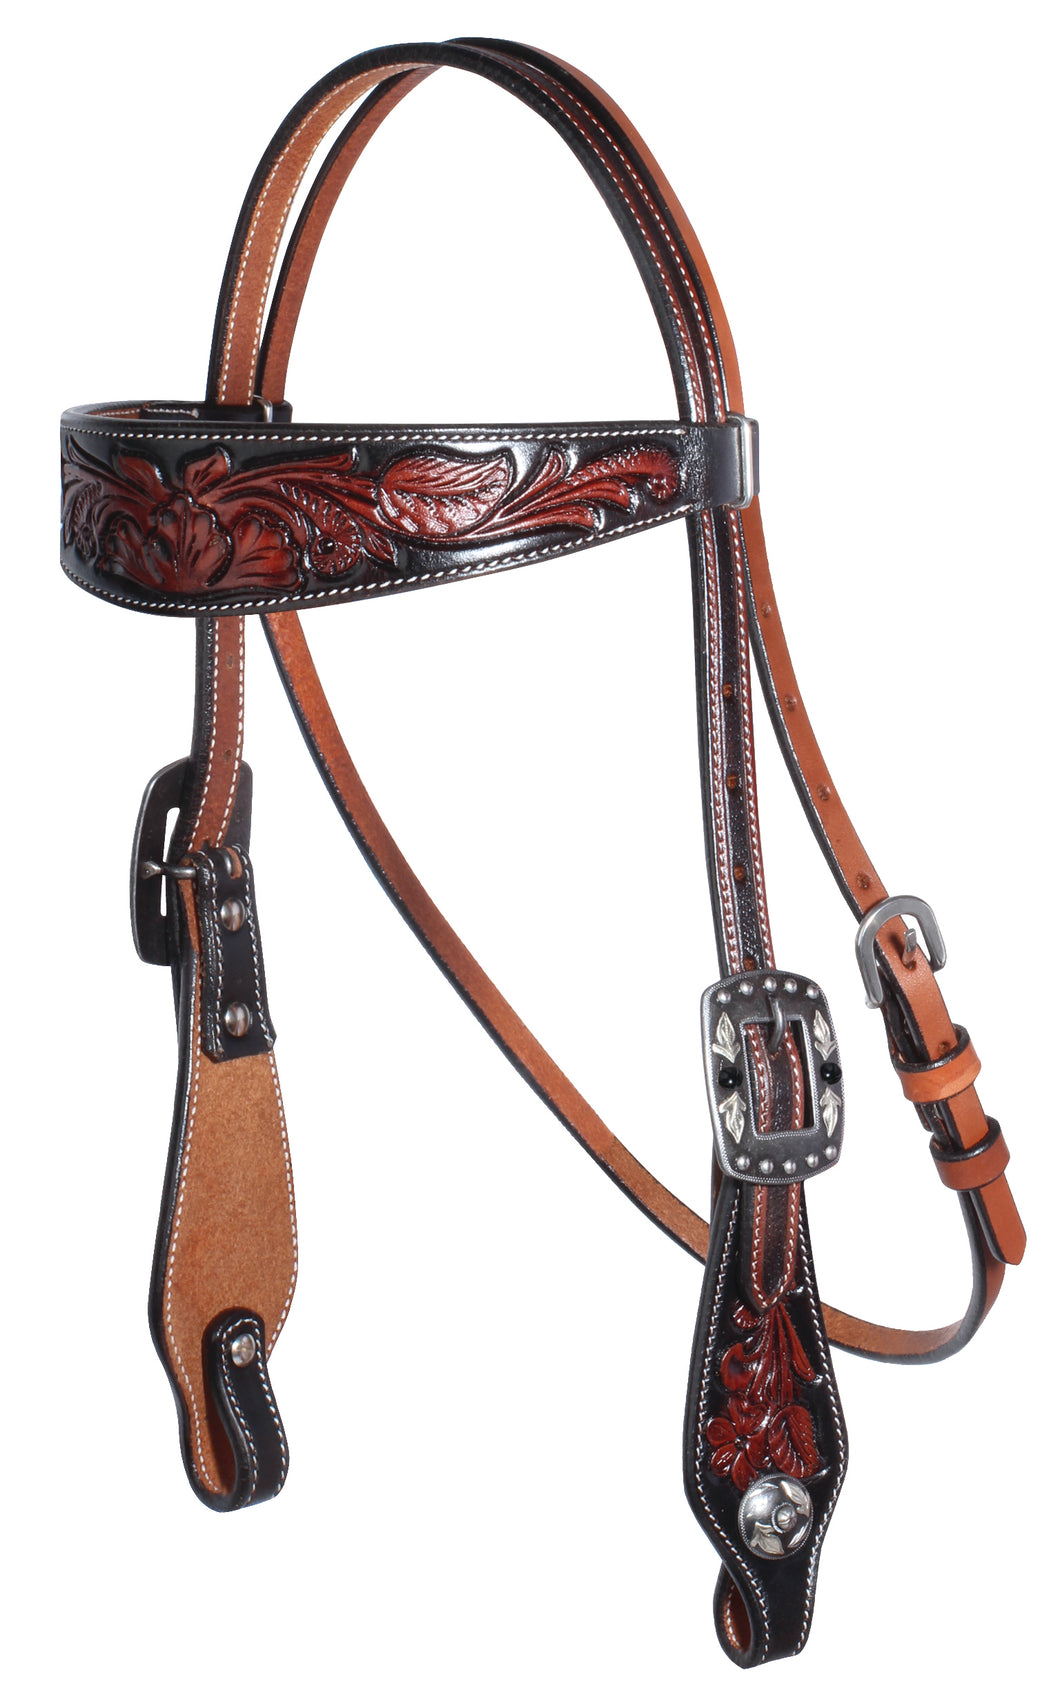 Pard's Western Shop Professional's Choice Black Floral Browband Headstall